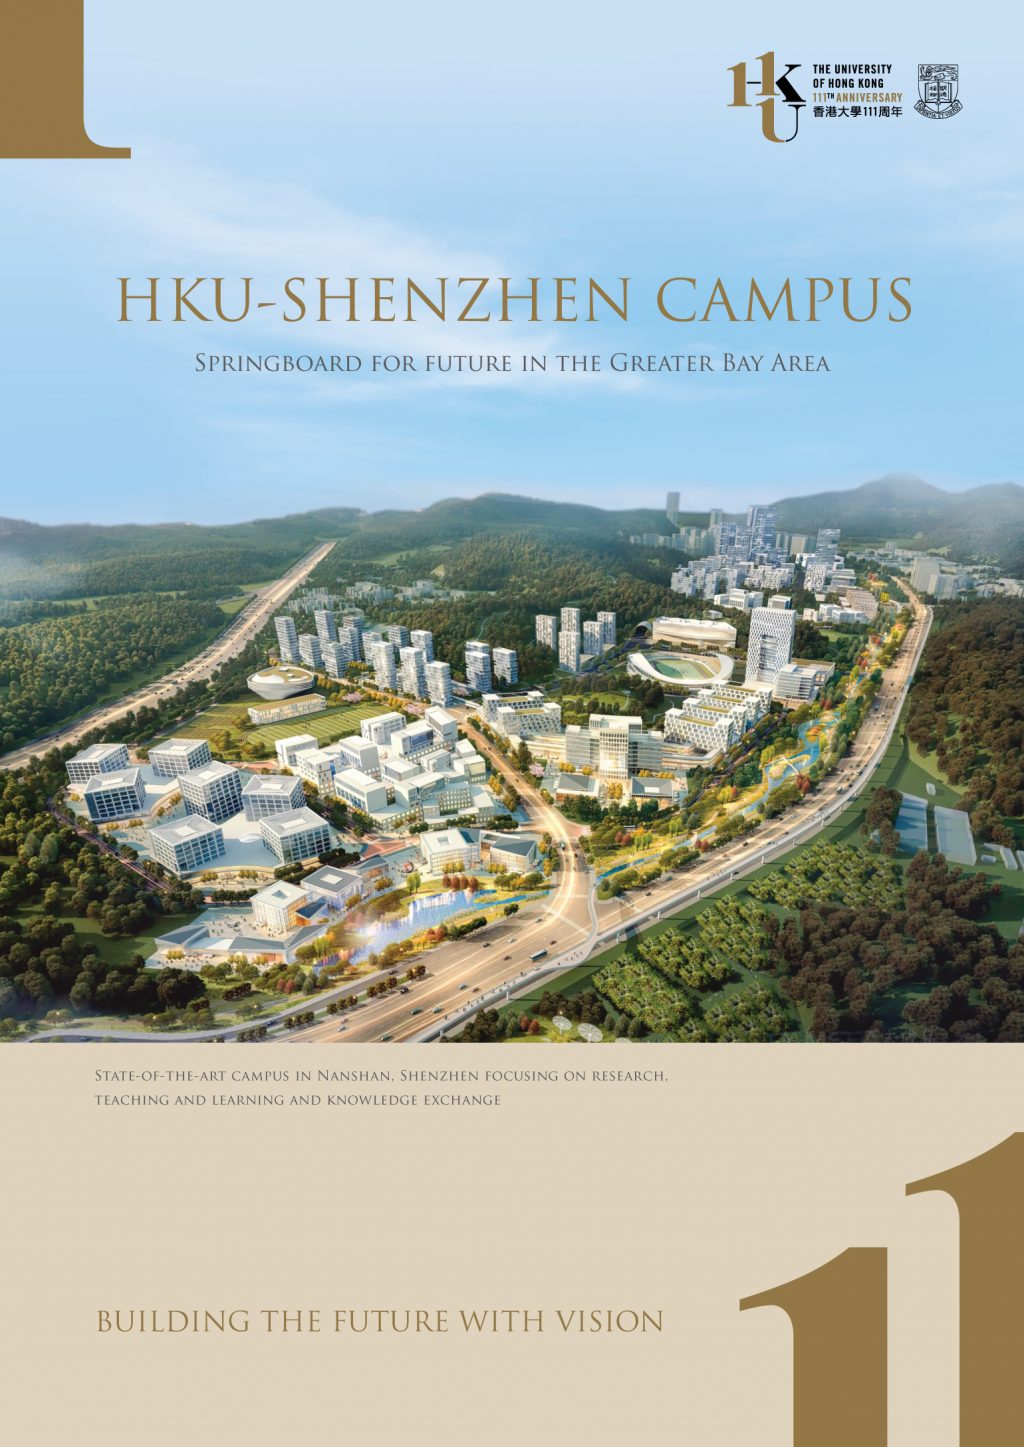 HKU-Shenzhen Campus - Springboard for future in the Greater Bay Area